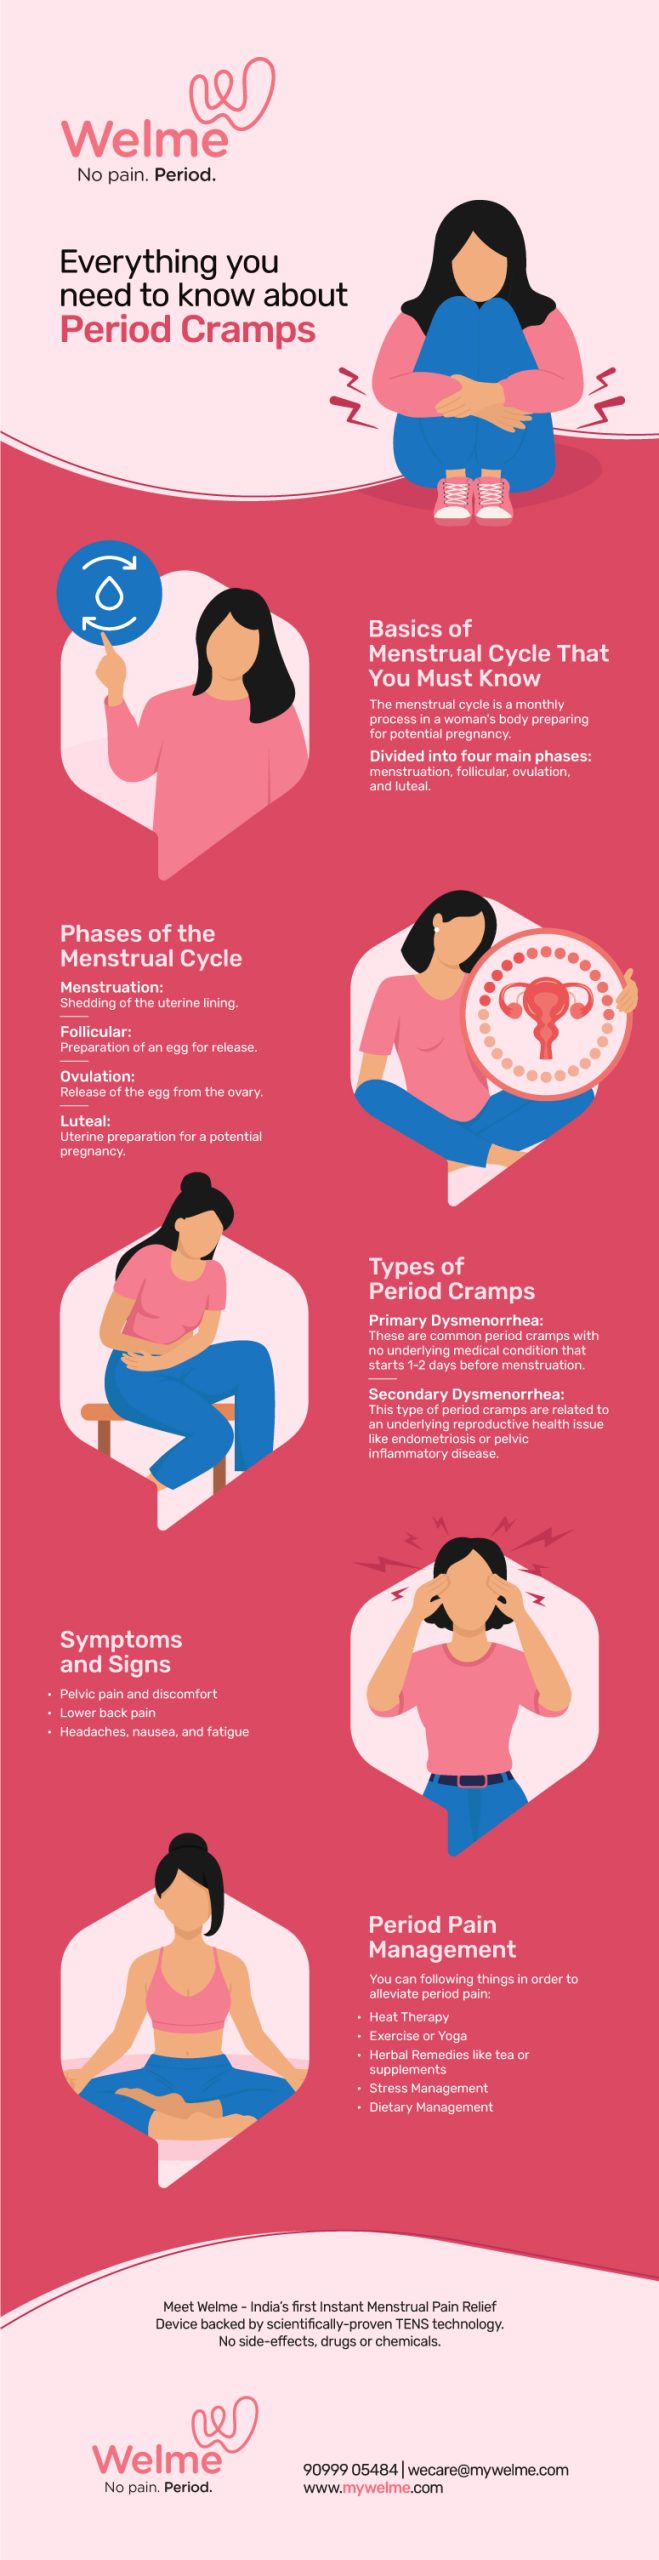 Painful Menstrual Cramps: What Is PMS?